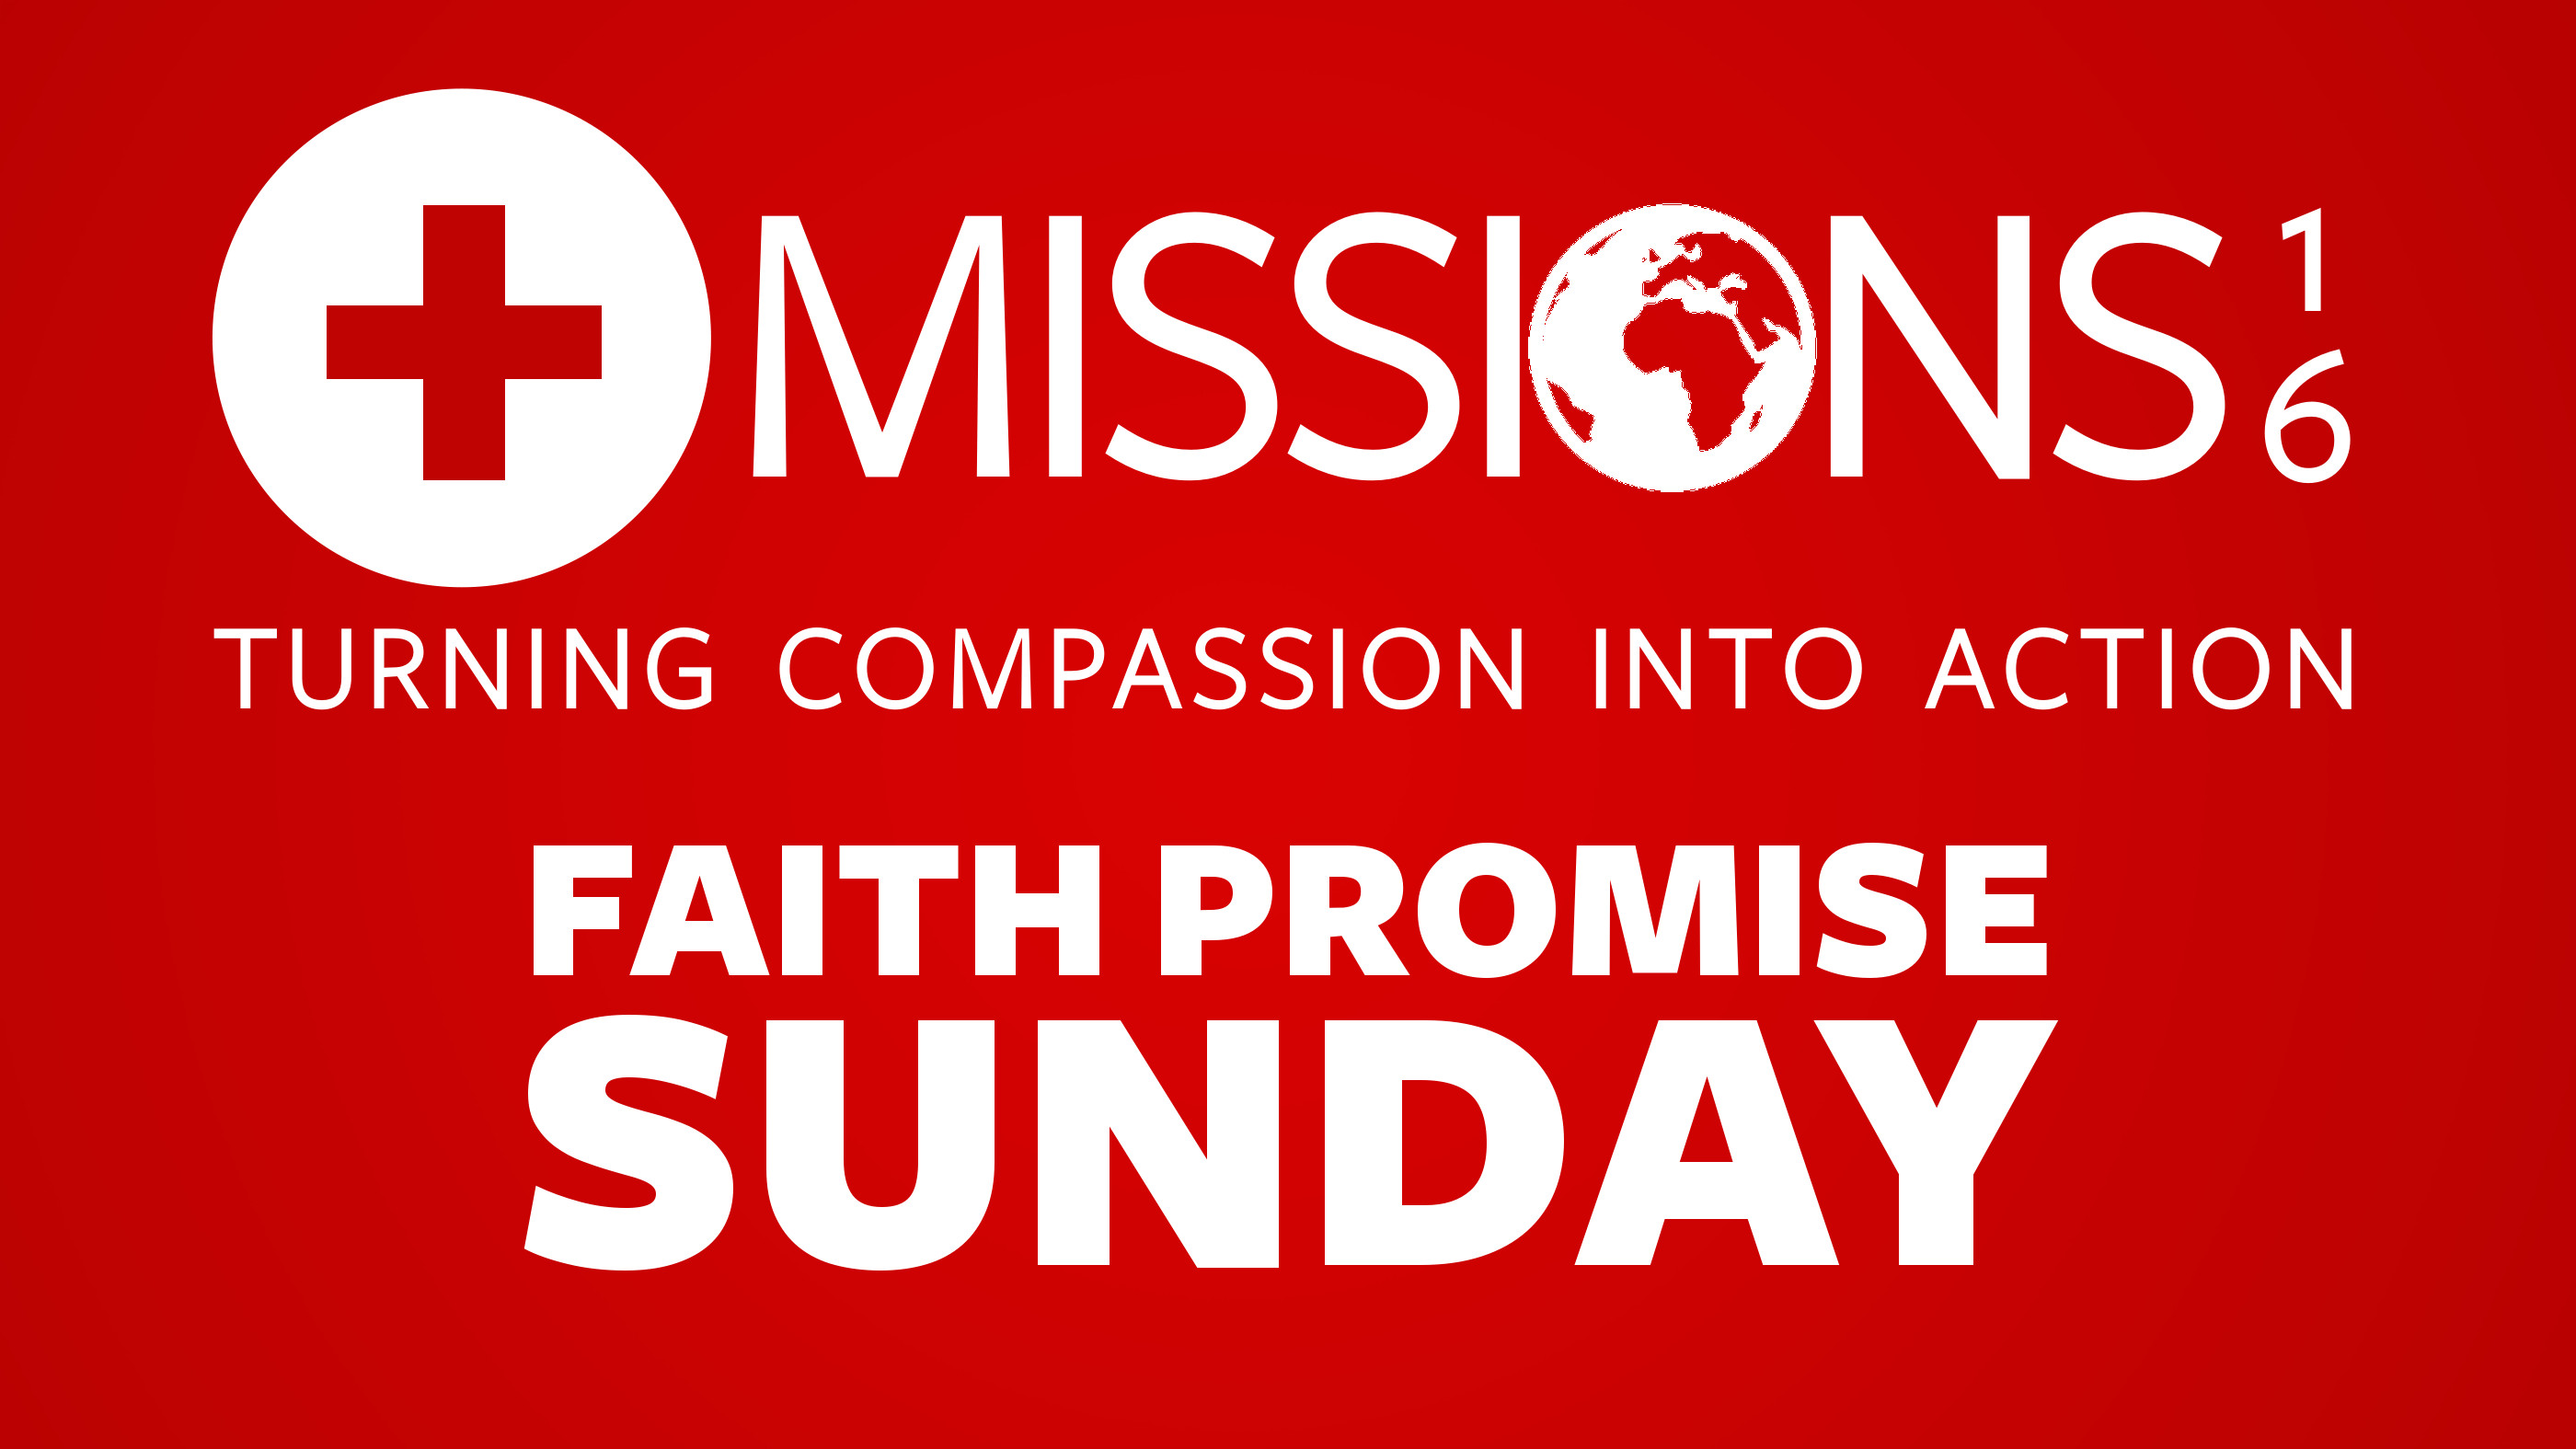 Missions 2016 | Turning Compassion into Action